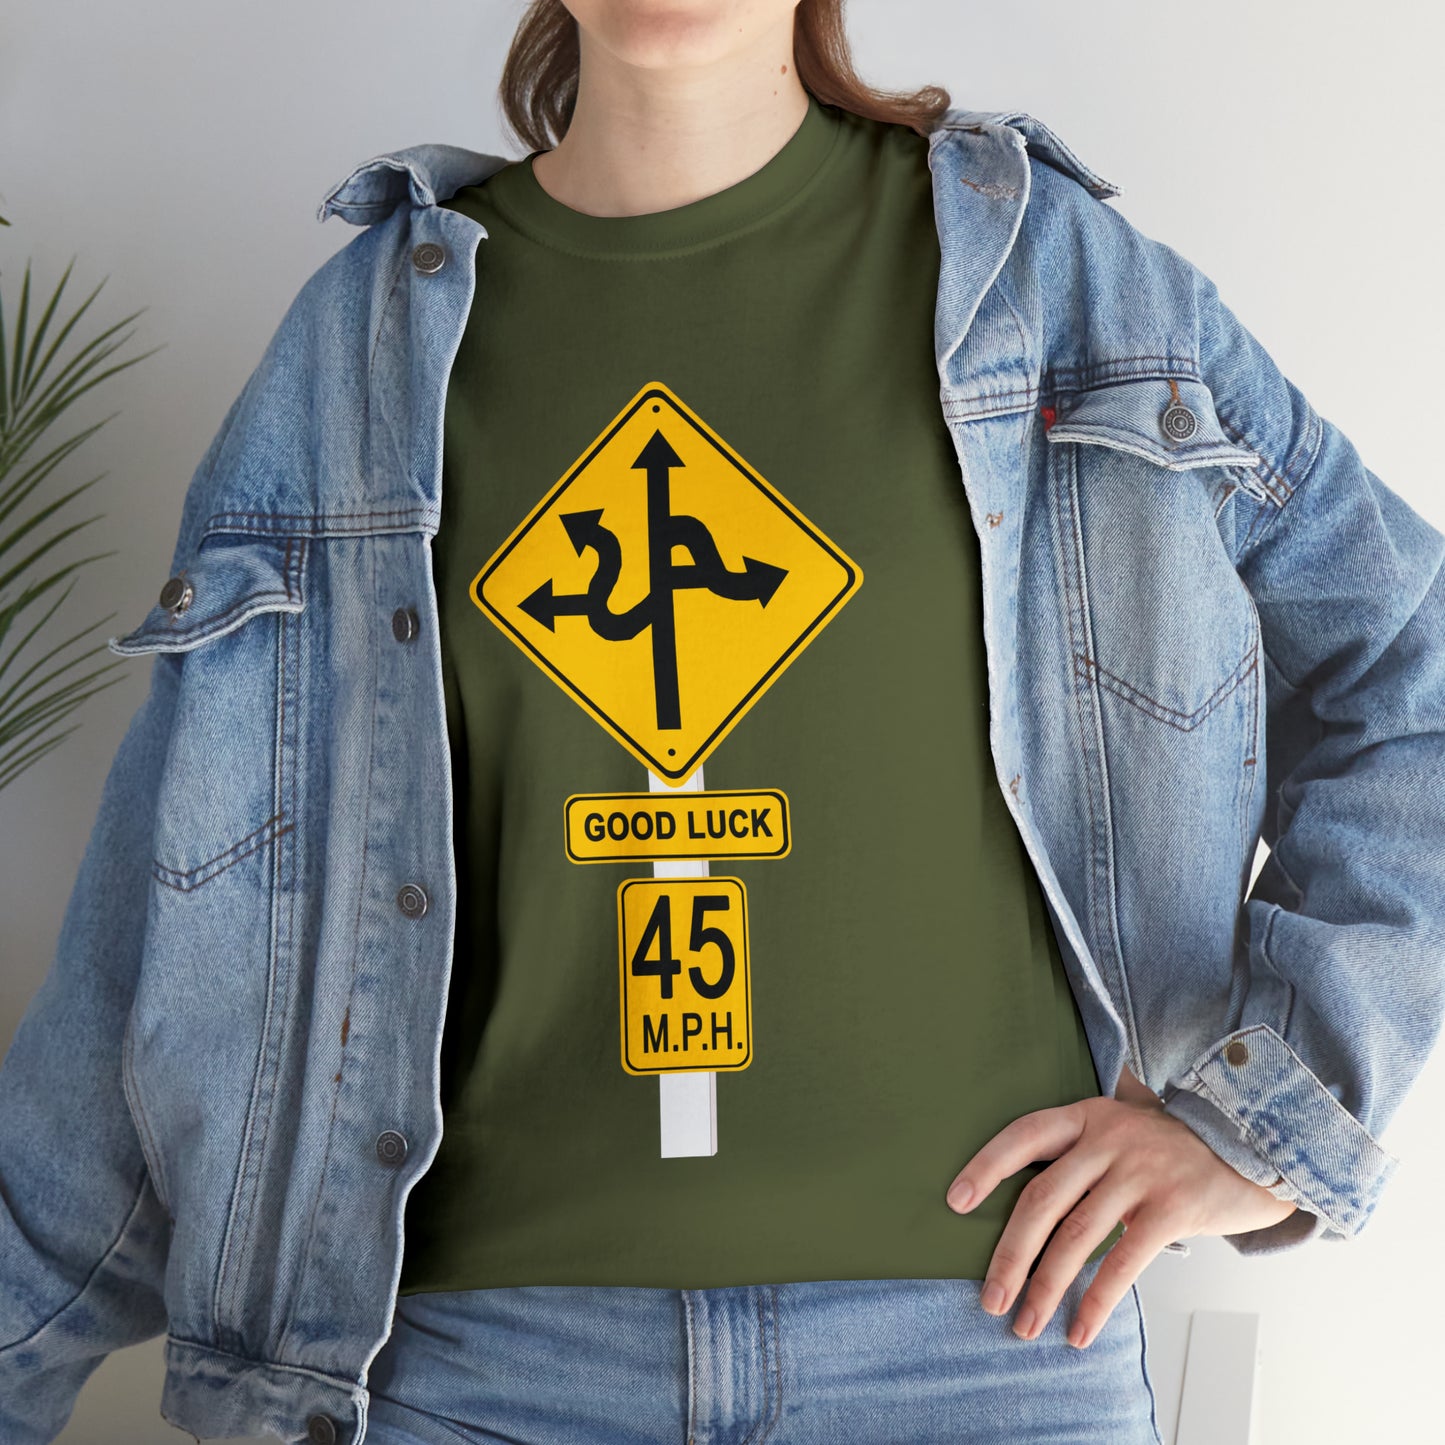 CRAZY FUNNY GOOD LUCK ROAD SIGN 45 MPH - Unisex Heavy Cotton Tee - USA